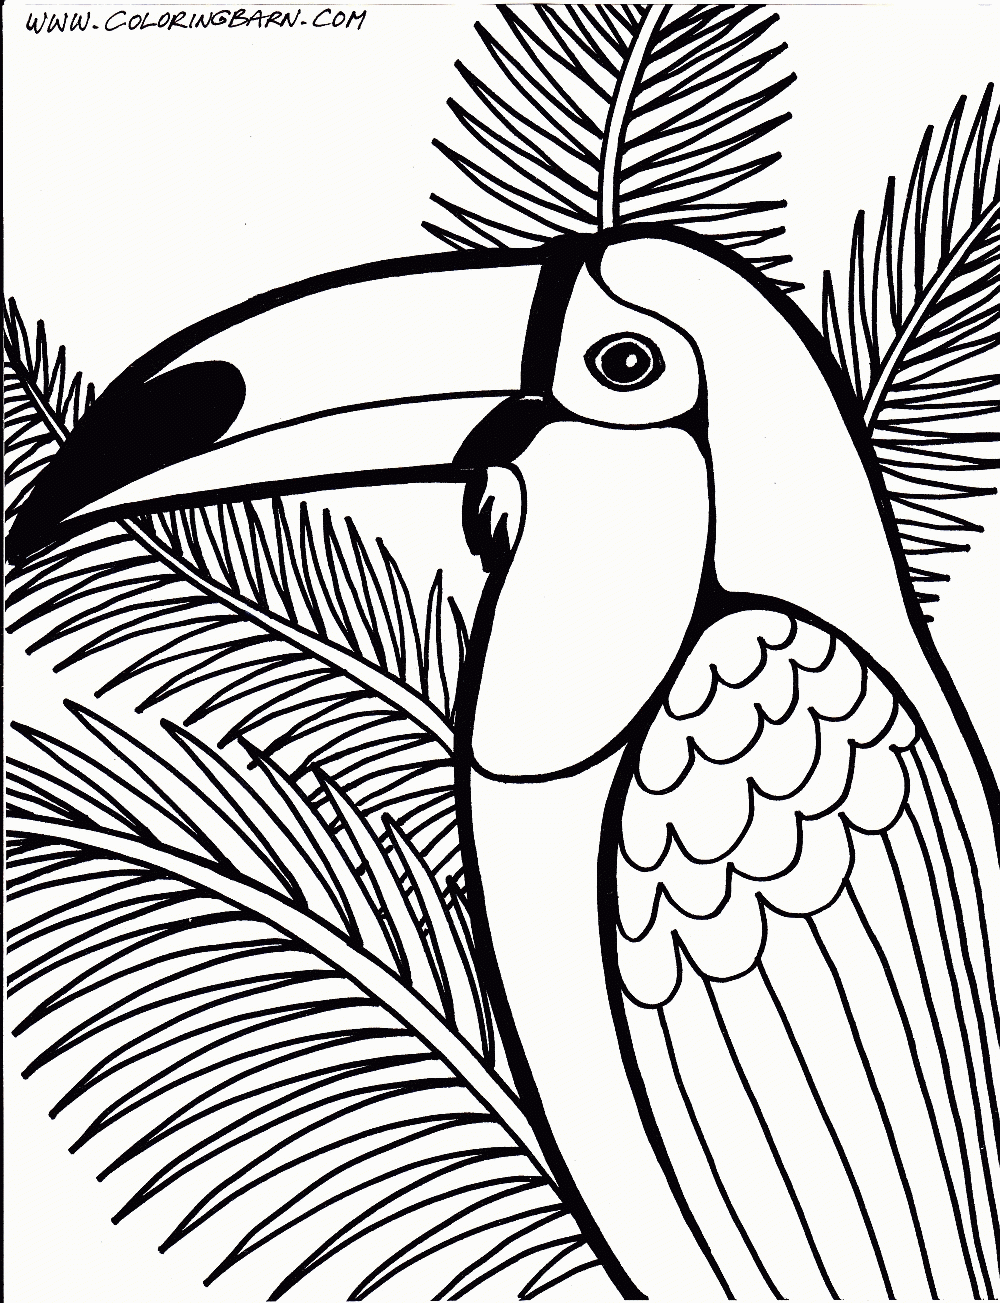 Free Rainforest Animals Coloring Pages Free Download Free Rainforest Animals Coloring Pages Free Png Images Free Cliparts On Clipart Library